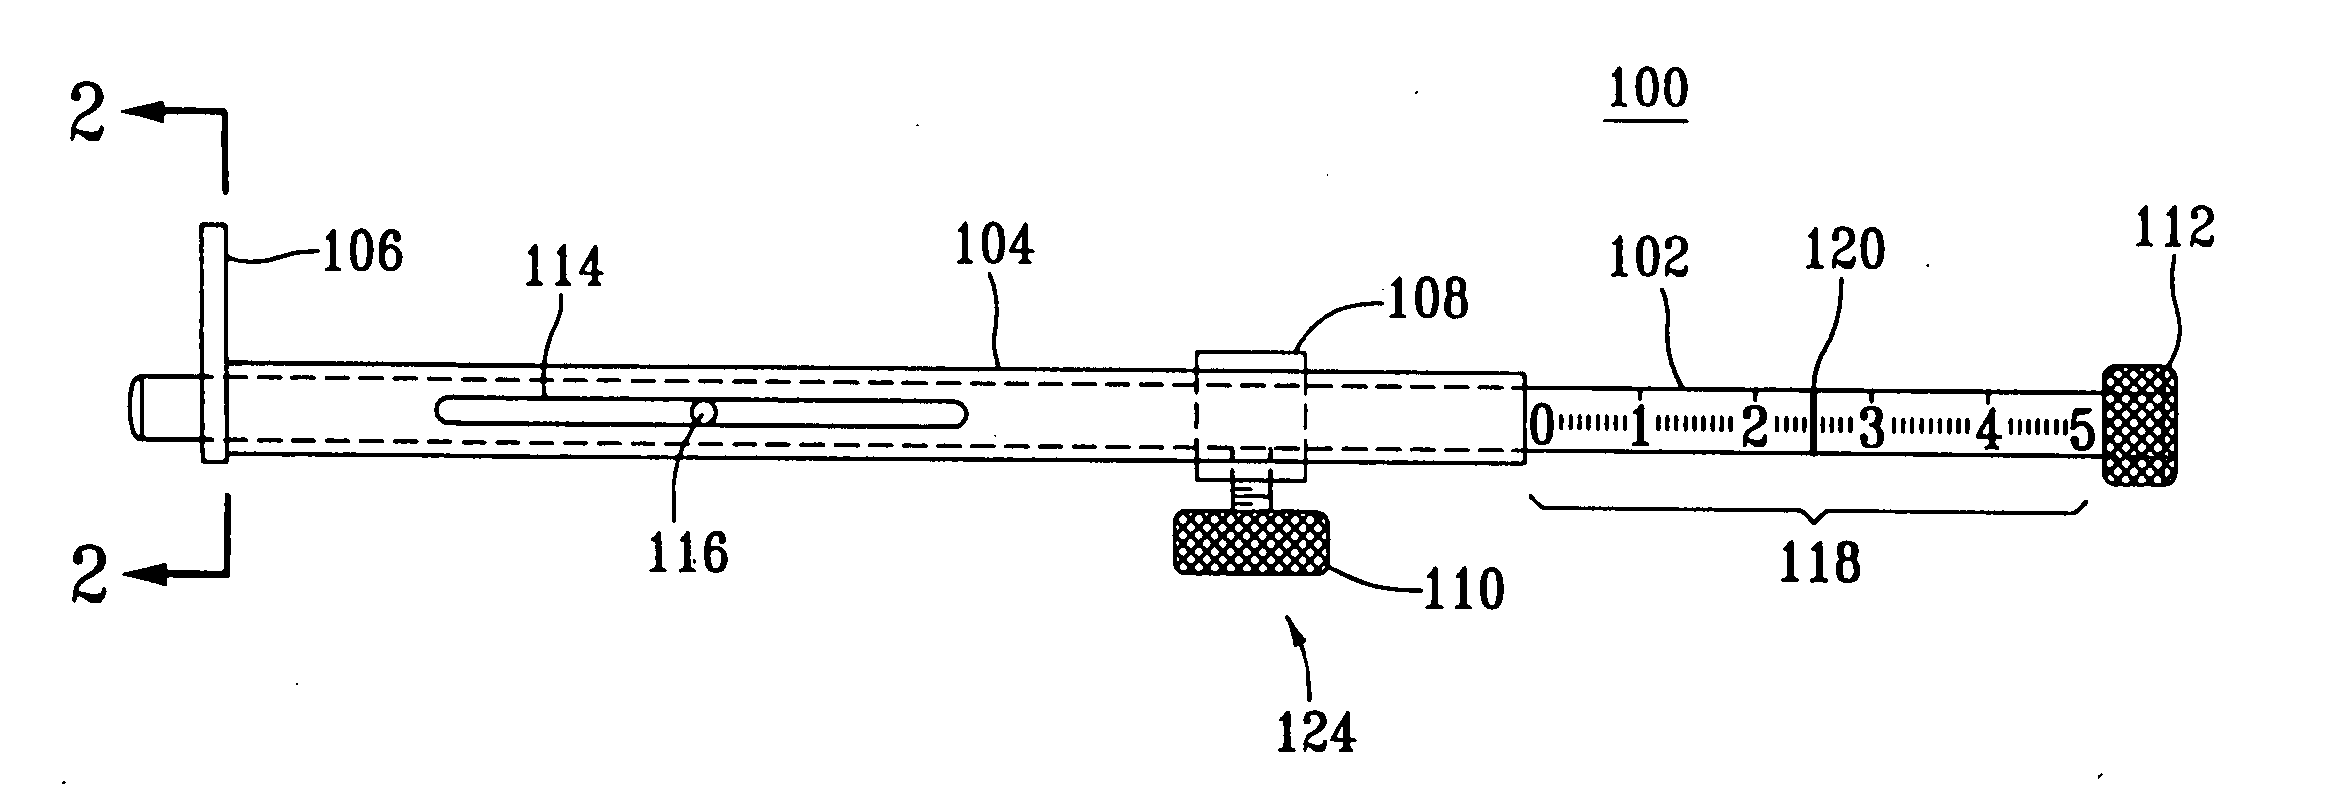 Devices and methods for cervix measurement